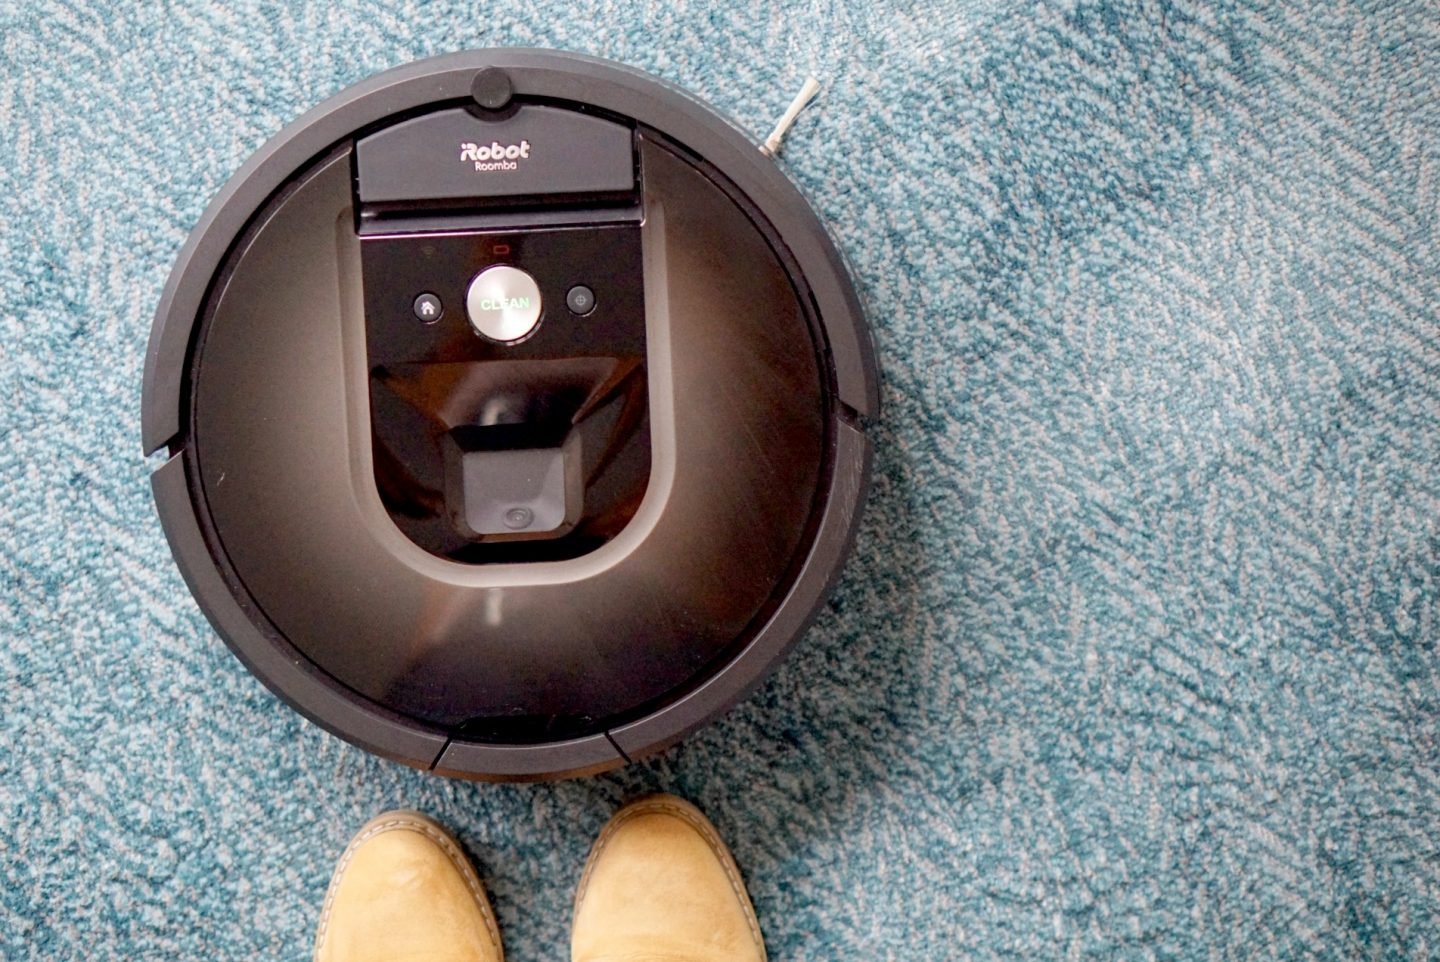 Are Robot Vacuum s Any Good?